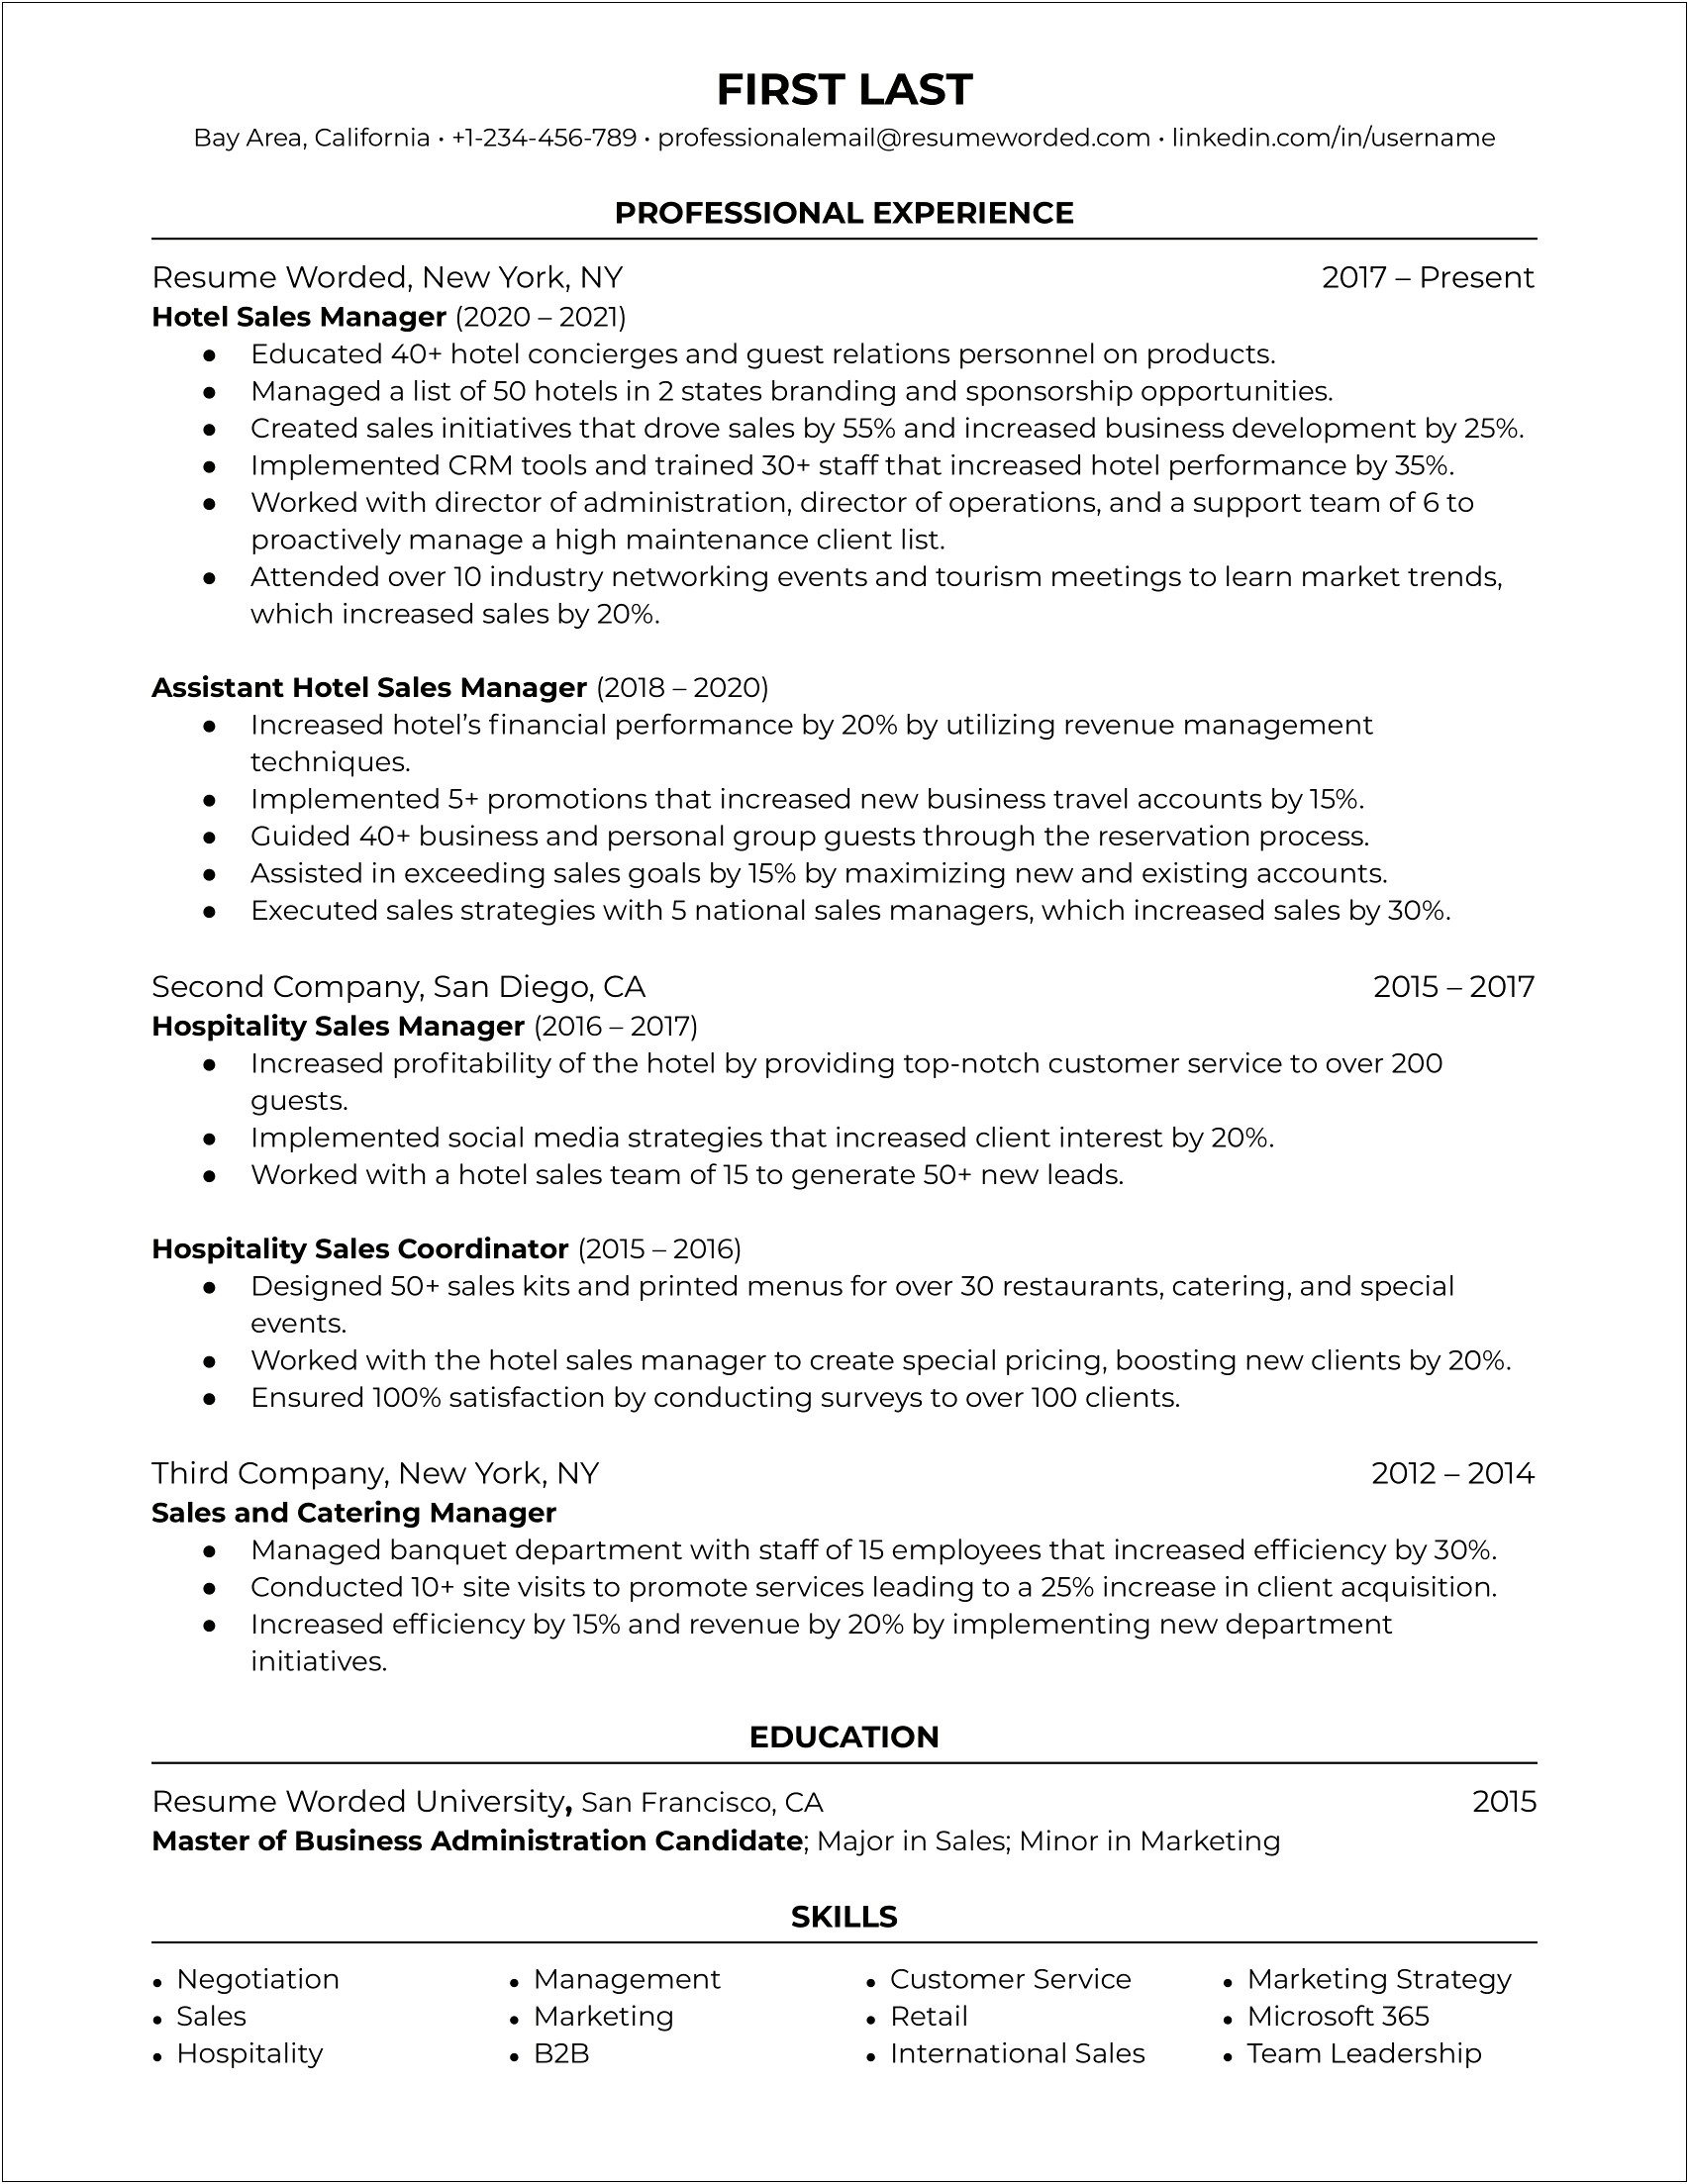 Hotel General Manager Experience Resume